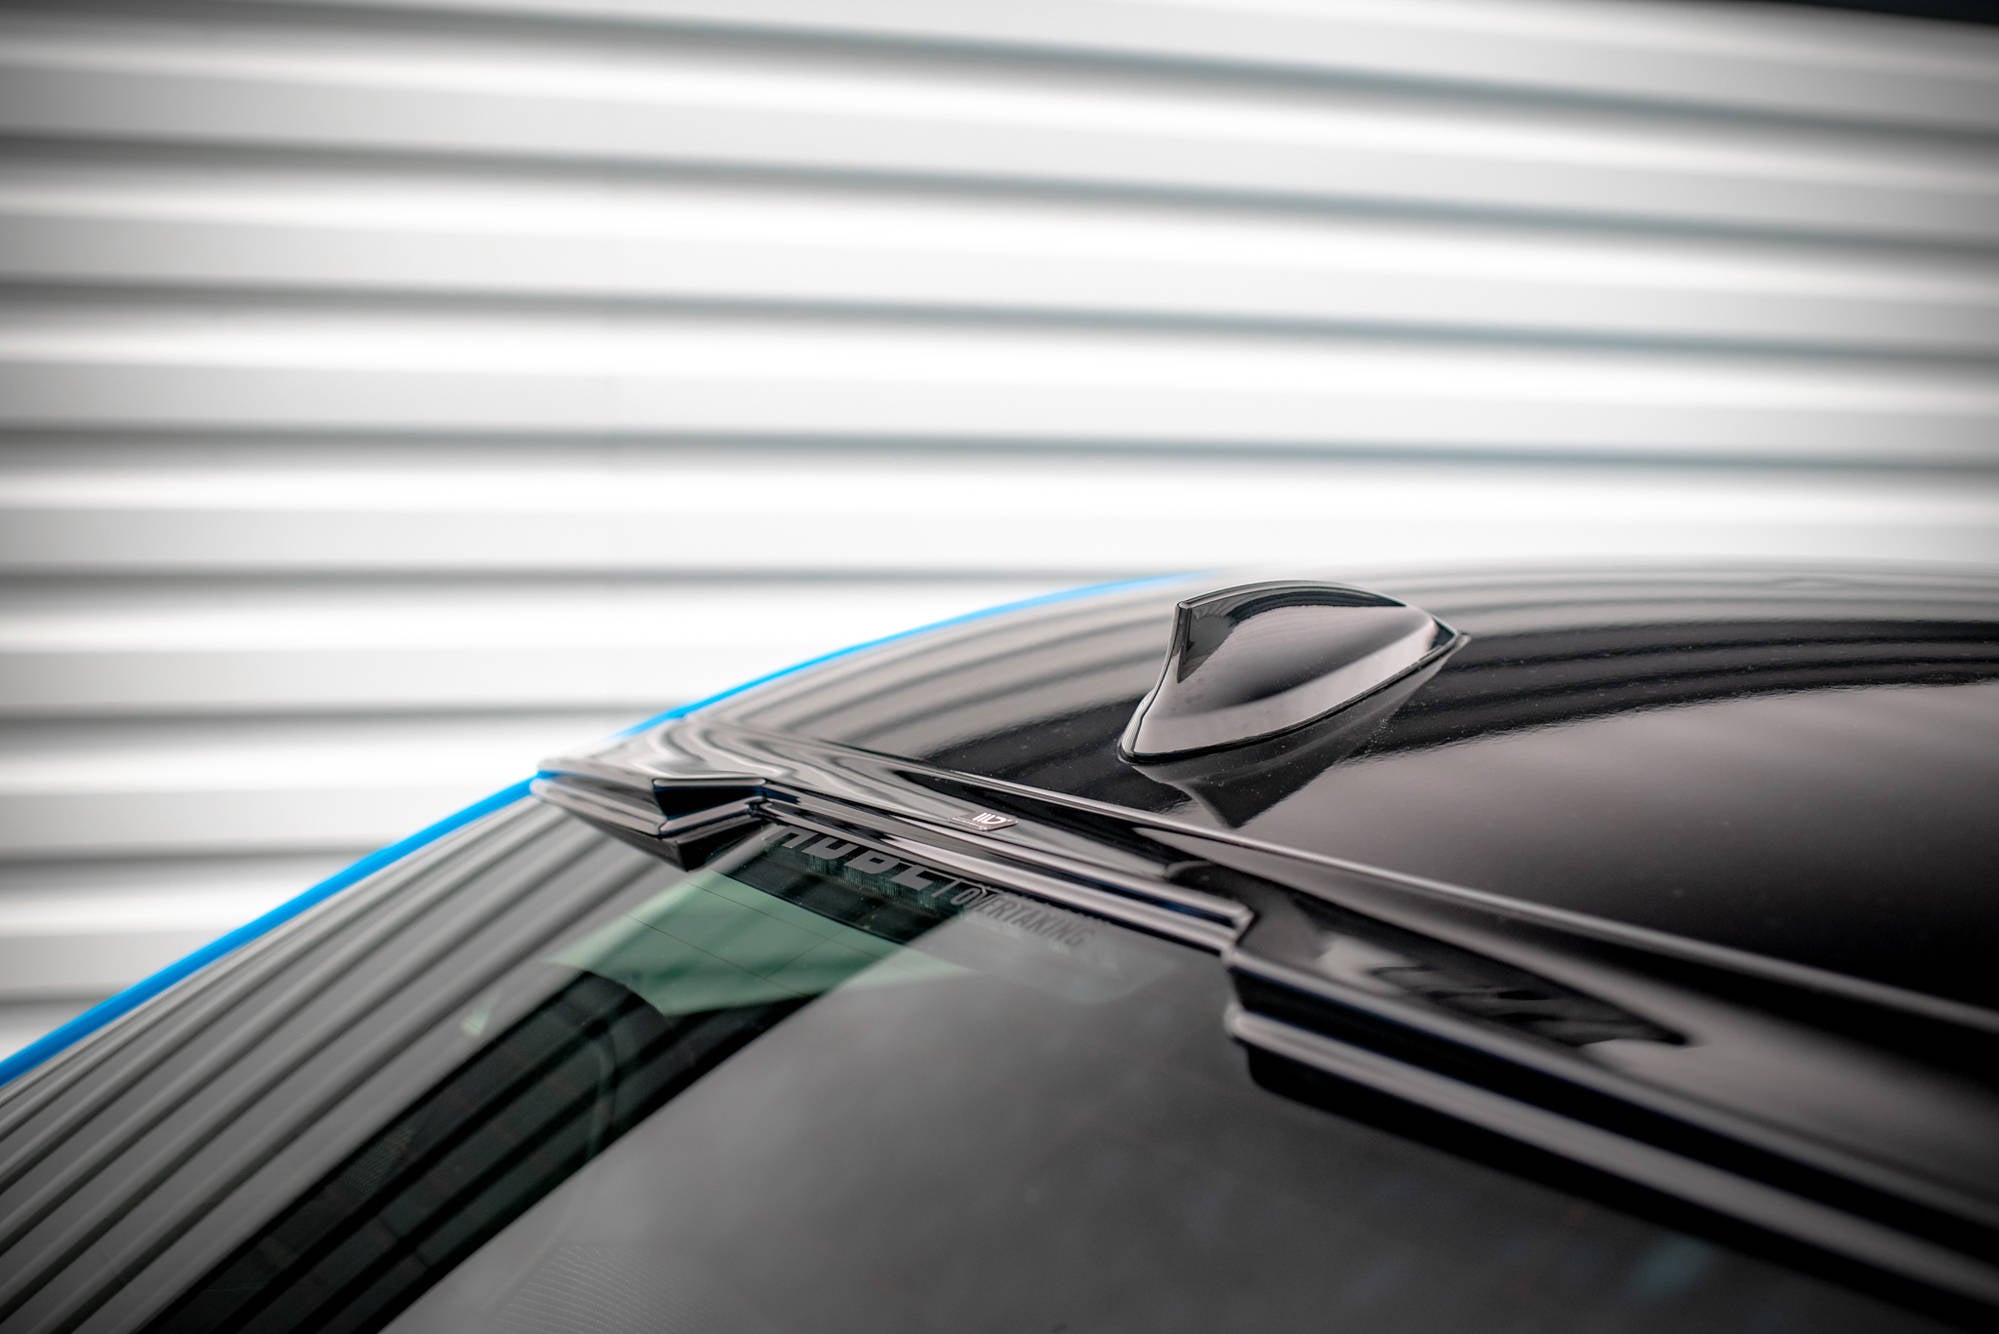 The extension of the rear window BMW M2 F87